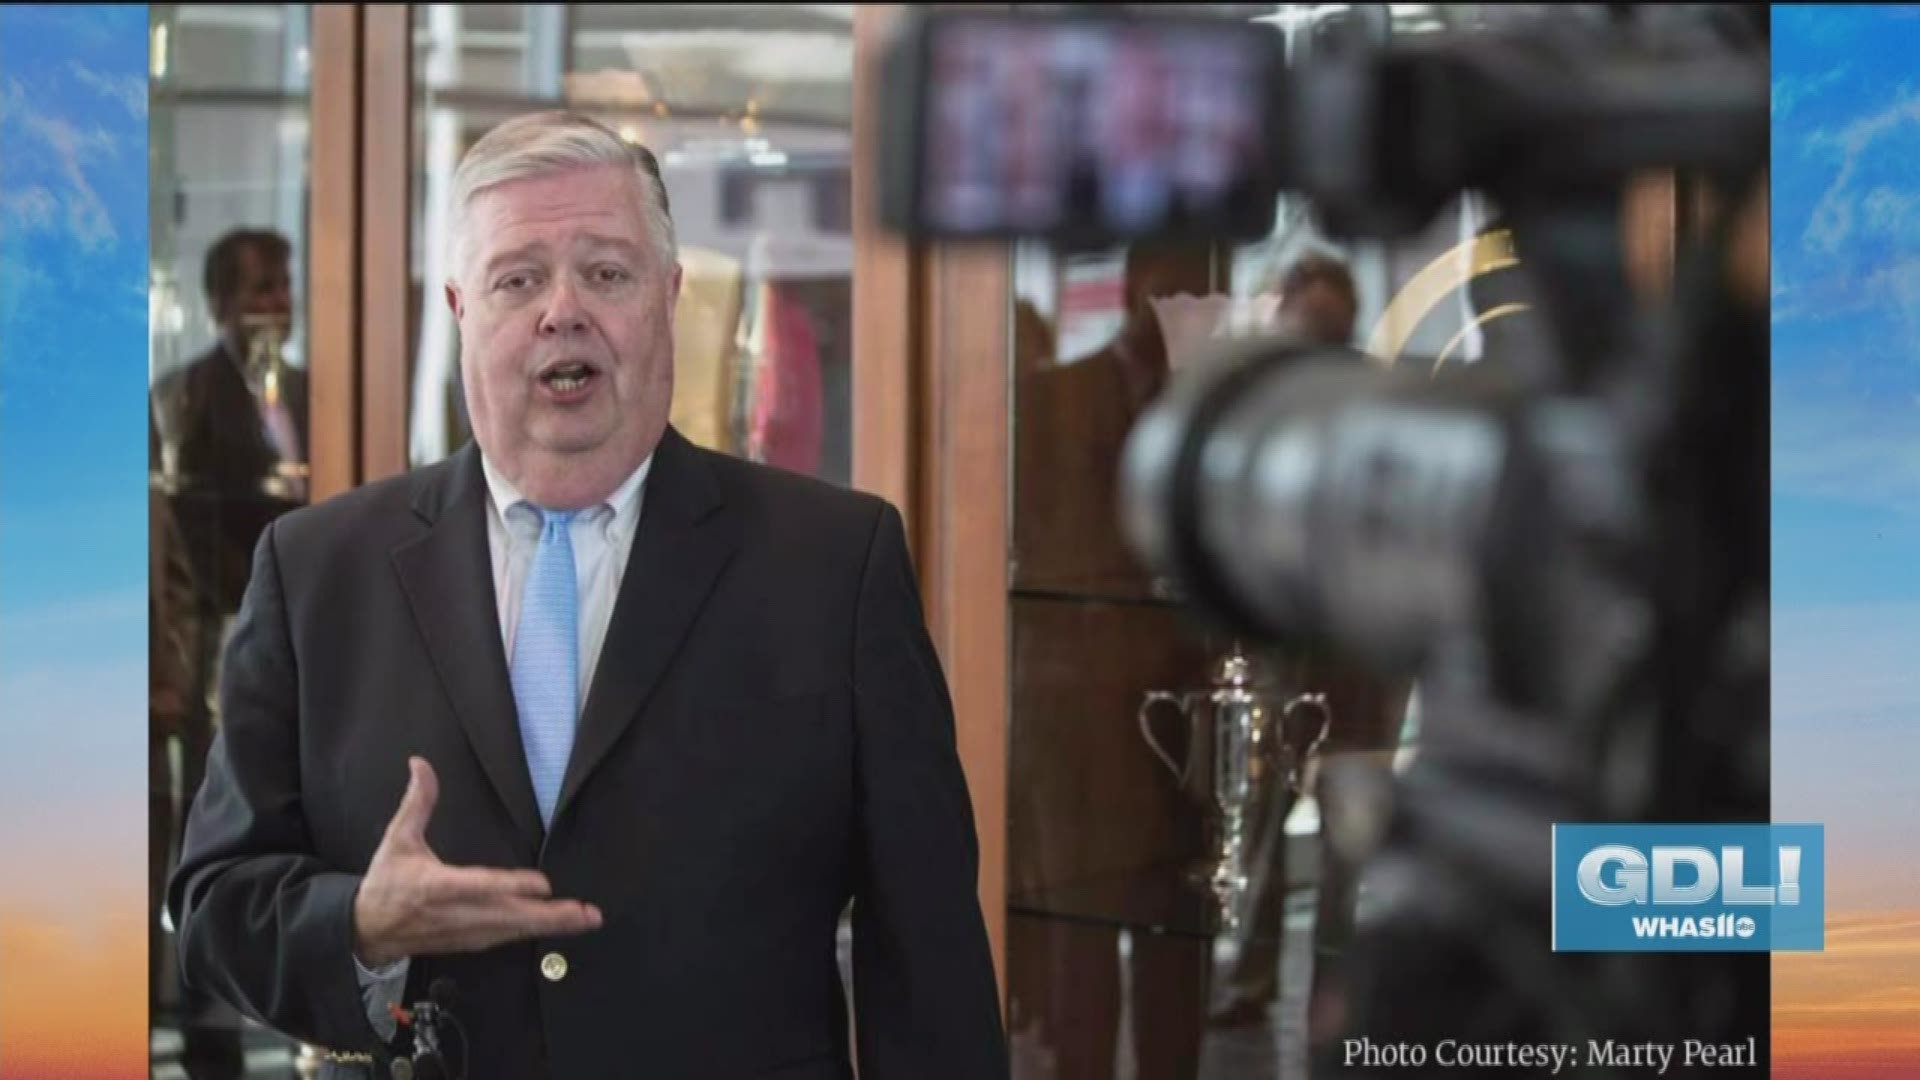 The Louisville community is mourning the loss of Churchill Downs spokesperson John Asher.